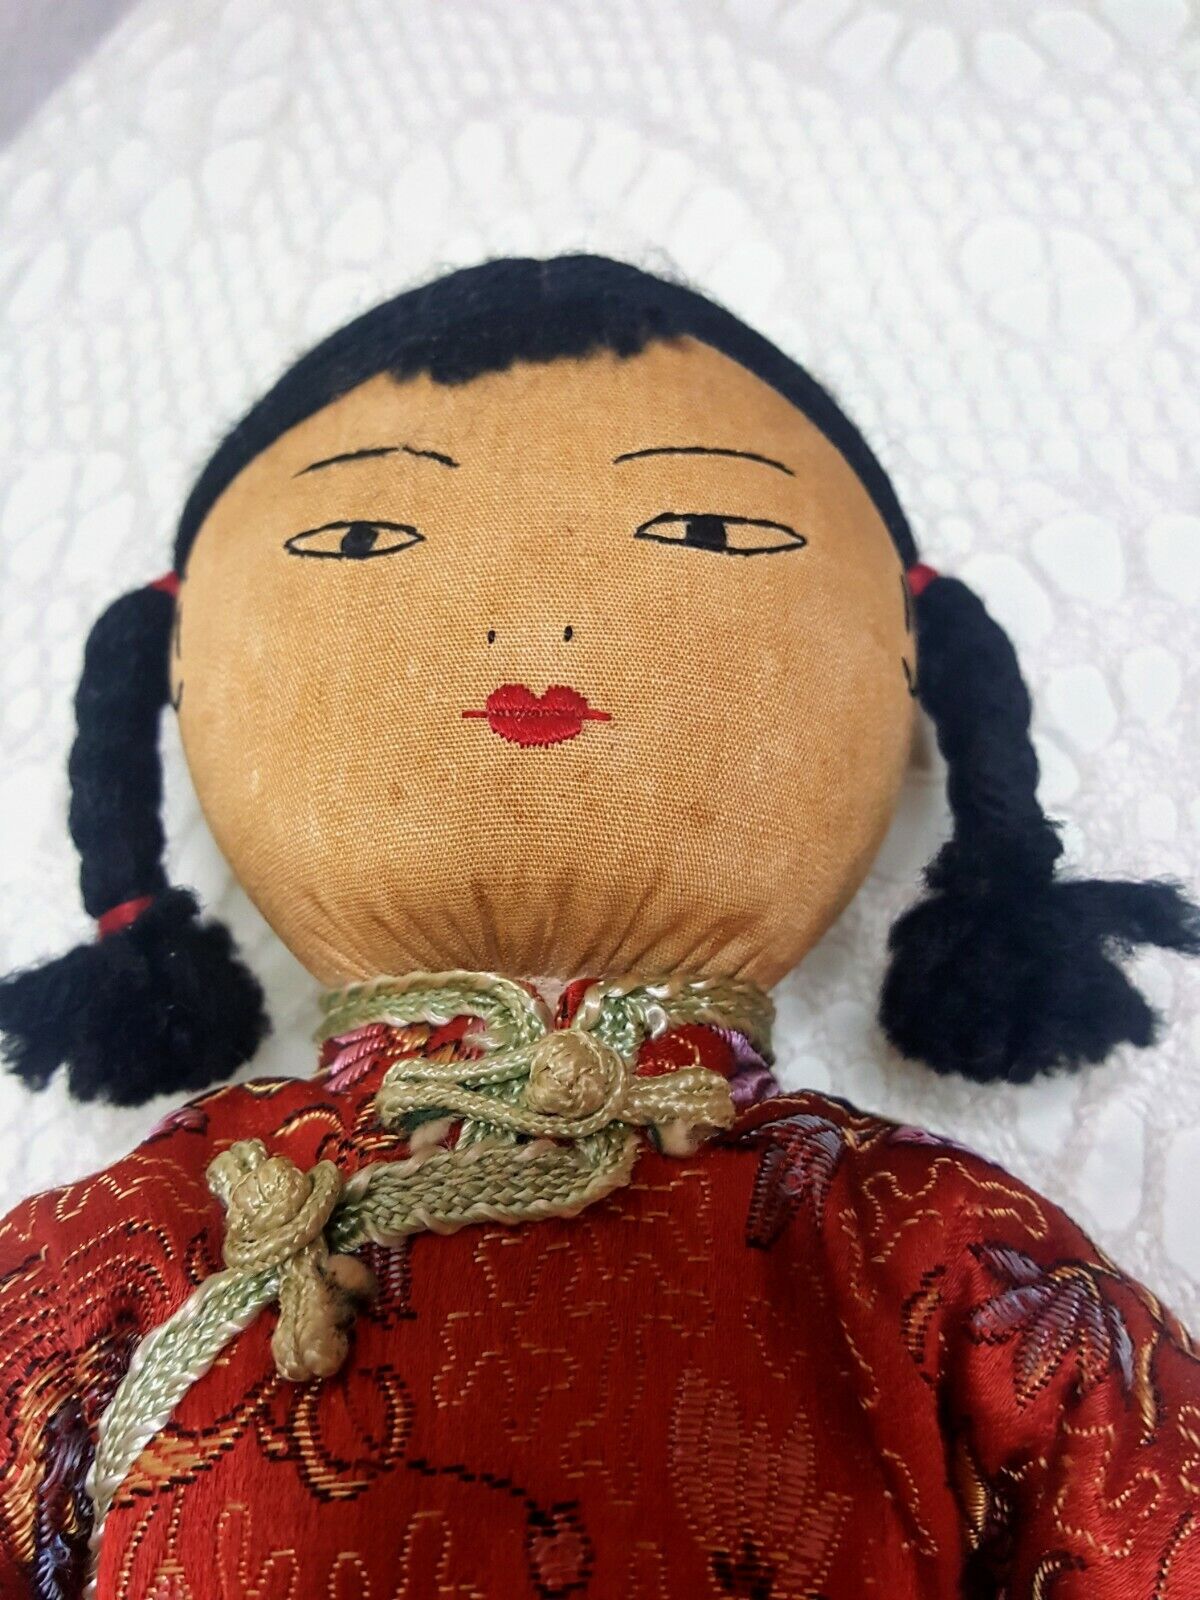 Vintage Chinese Handmade Cloth Doll W/ Silk Clothing Stitched 10"